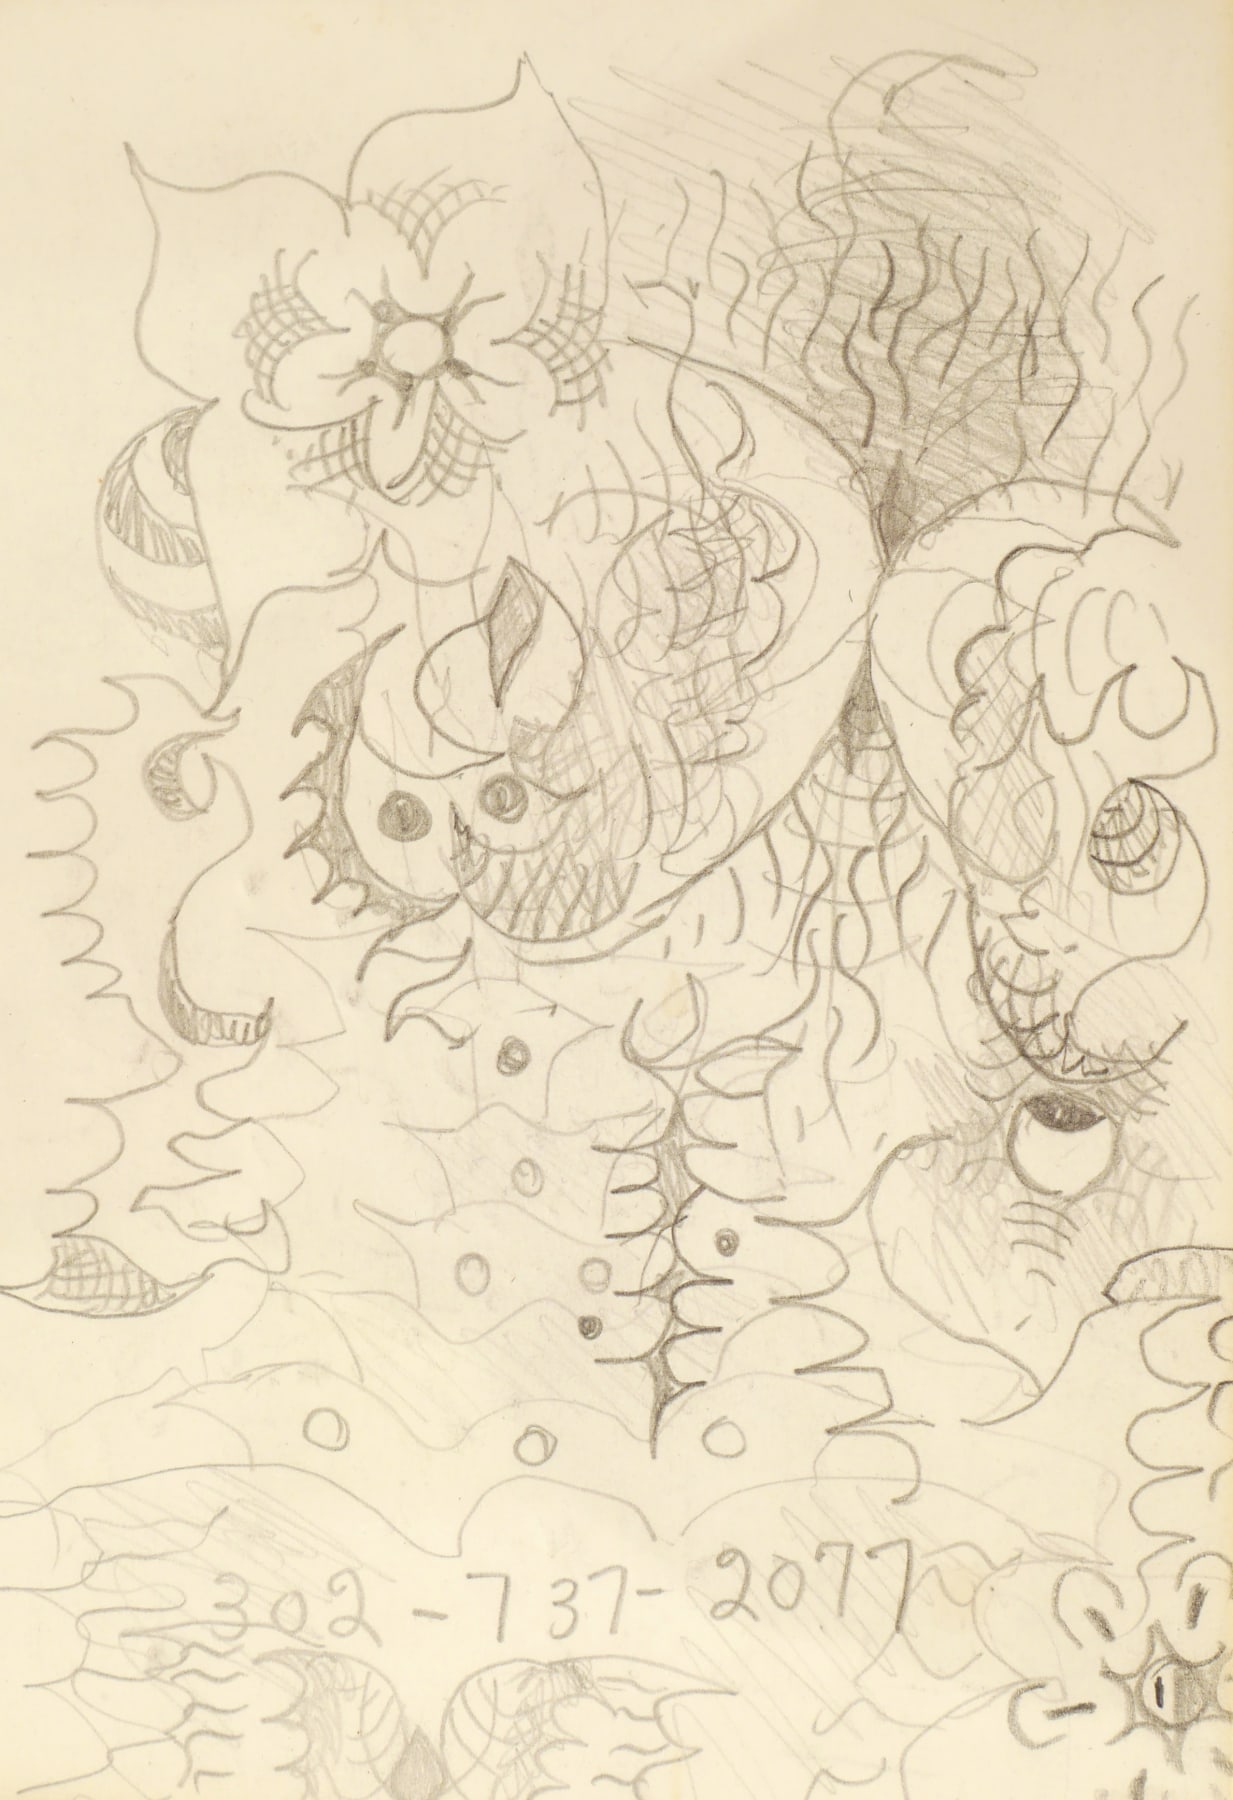 Charles Burchfield: Doodles & Sketches -  - Viewing Room - DC Moore Gallery Viewing Room